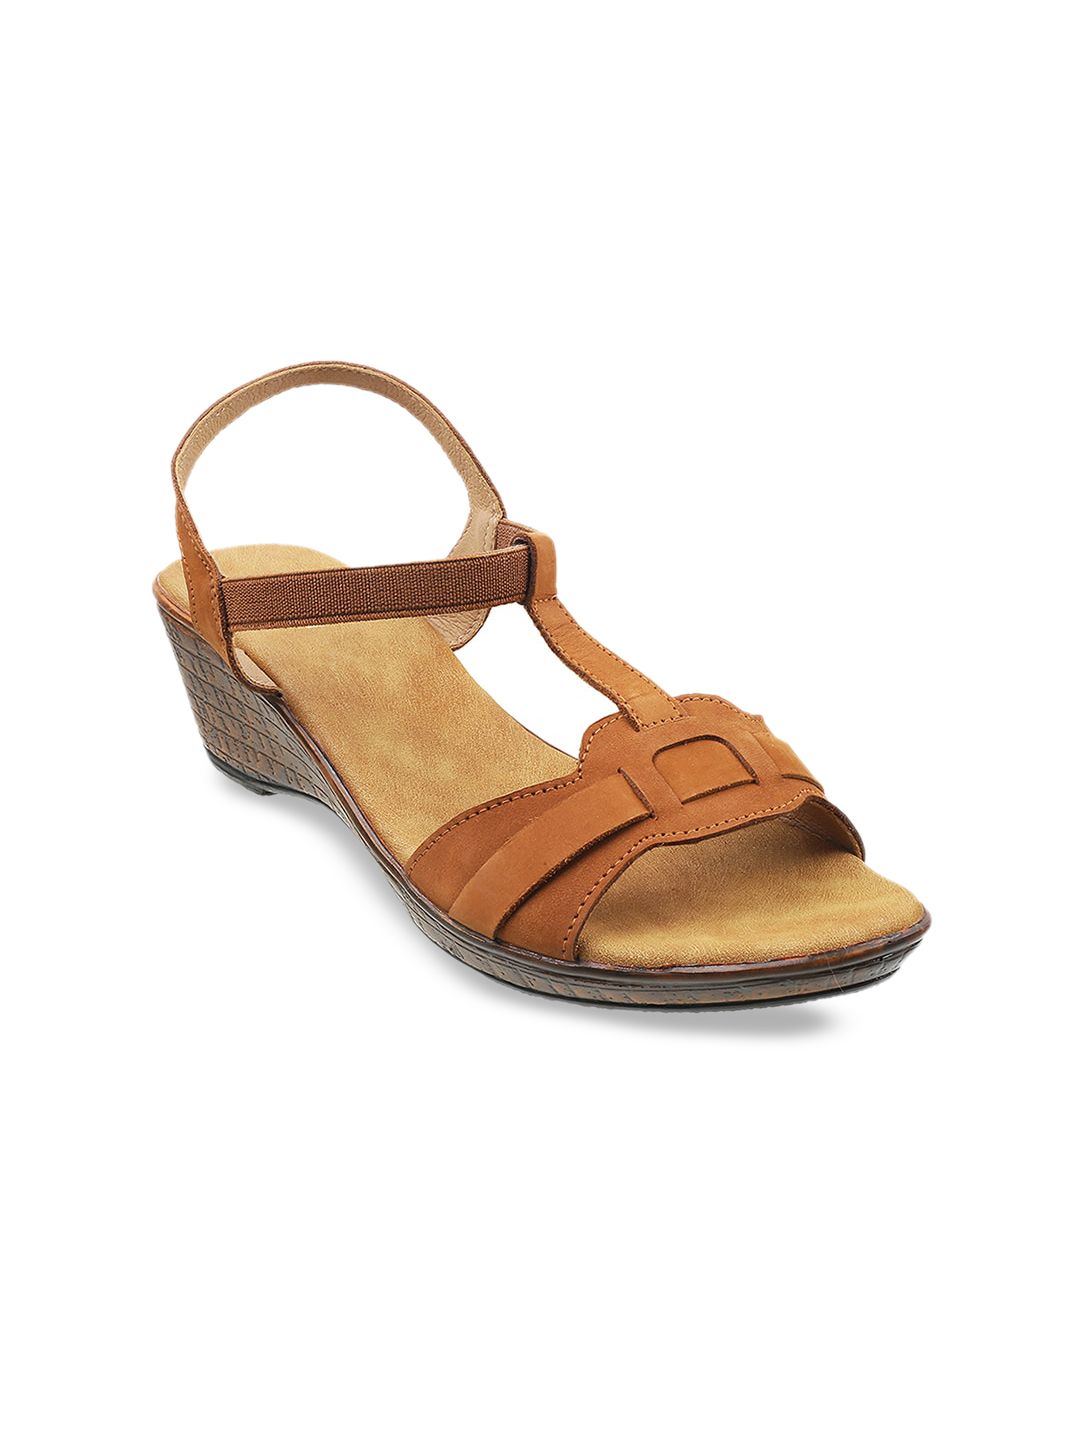 Mochi Tan Textured Wedge Sandals Price in India